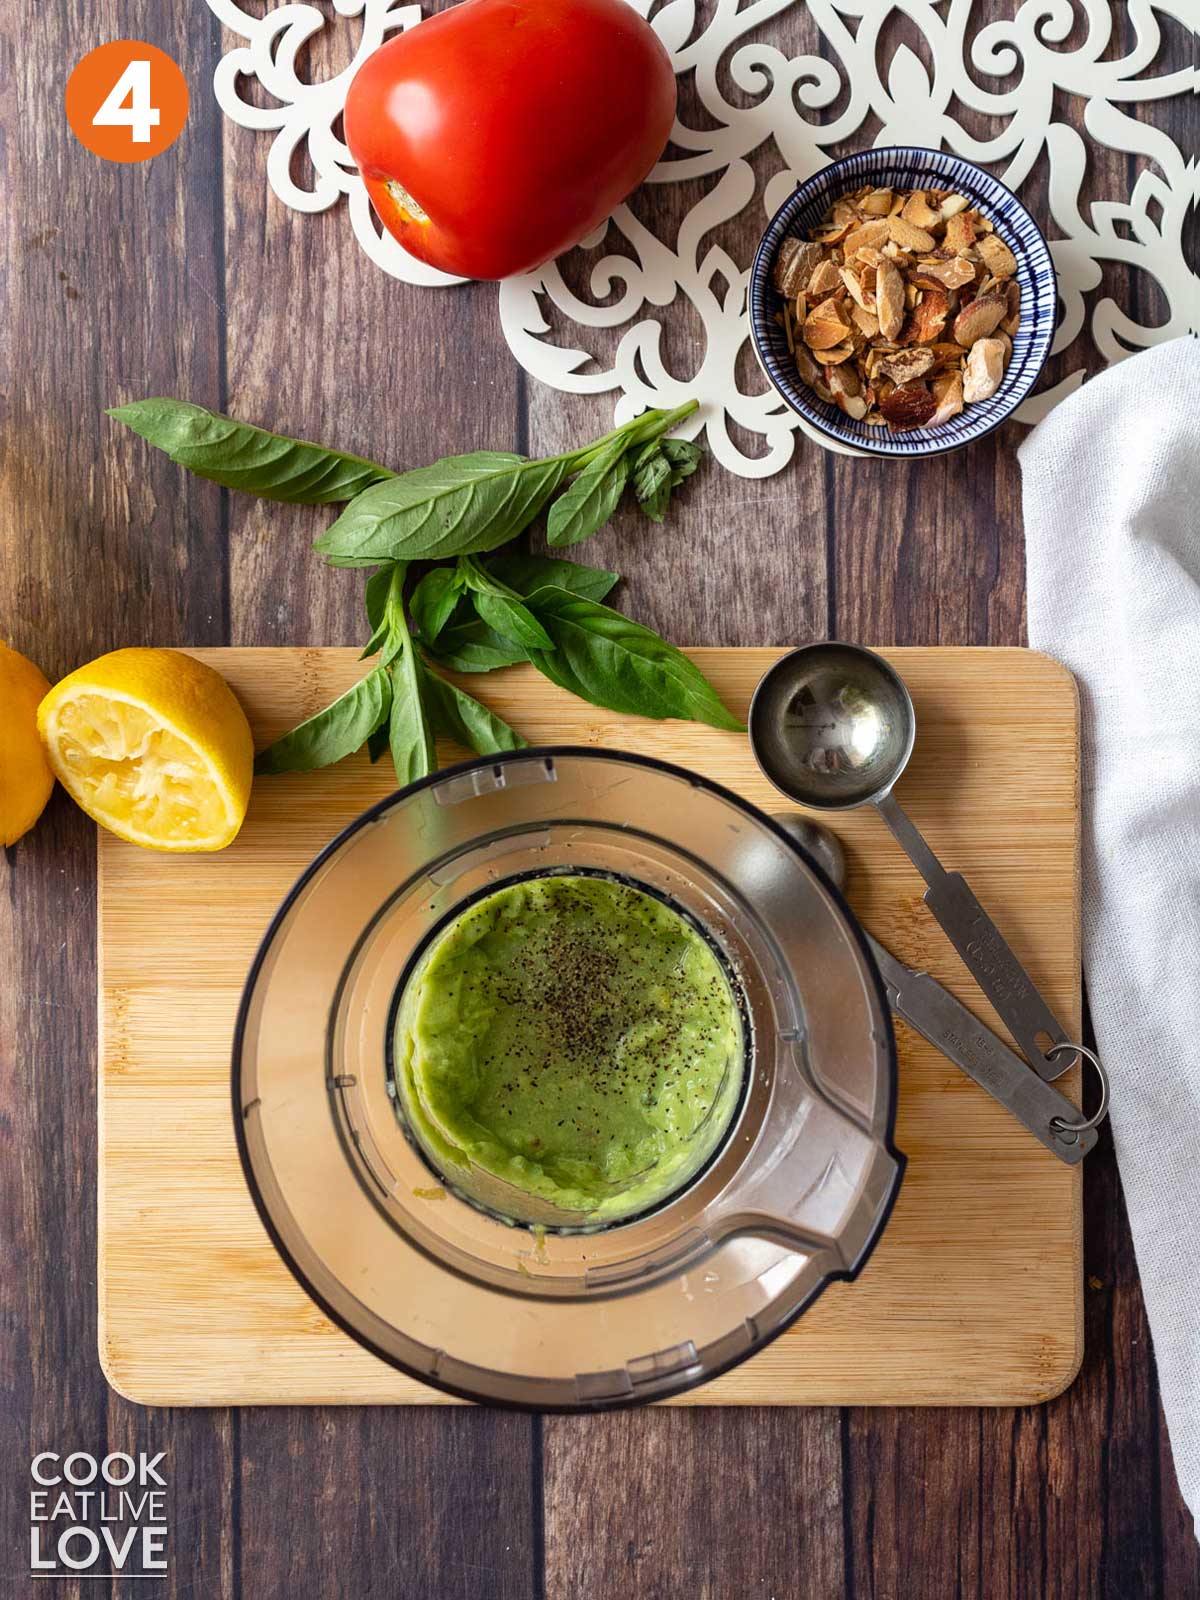 Lemon basil dressing is blended and ready to serve.